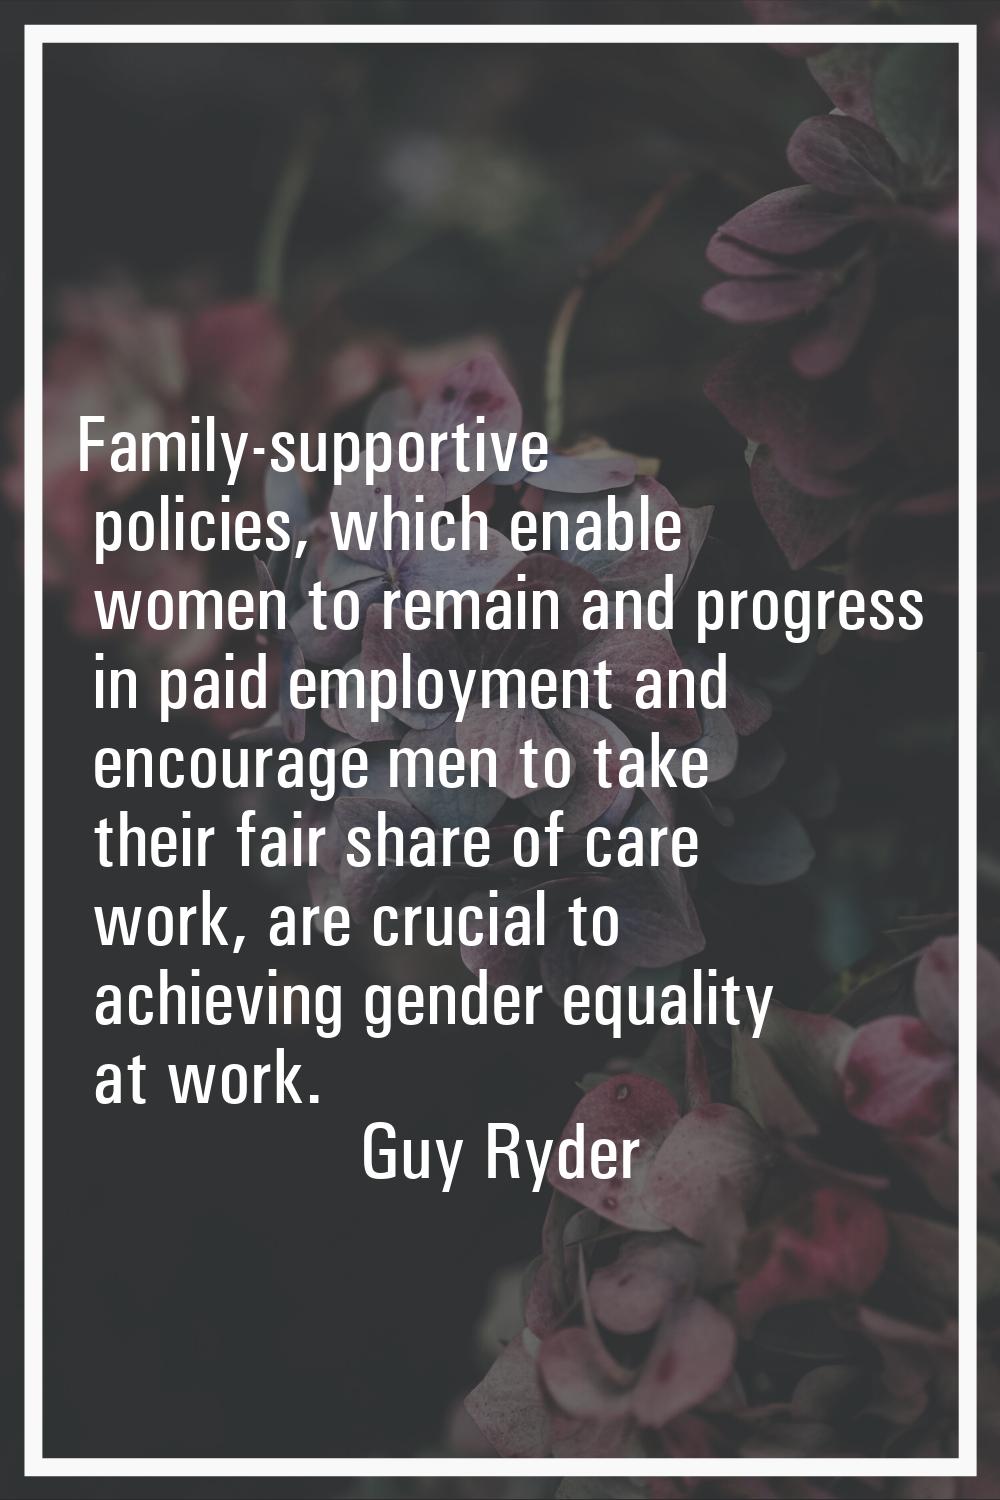 Family-supportive policies, which enable women to remain and progress in paid employment and encour